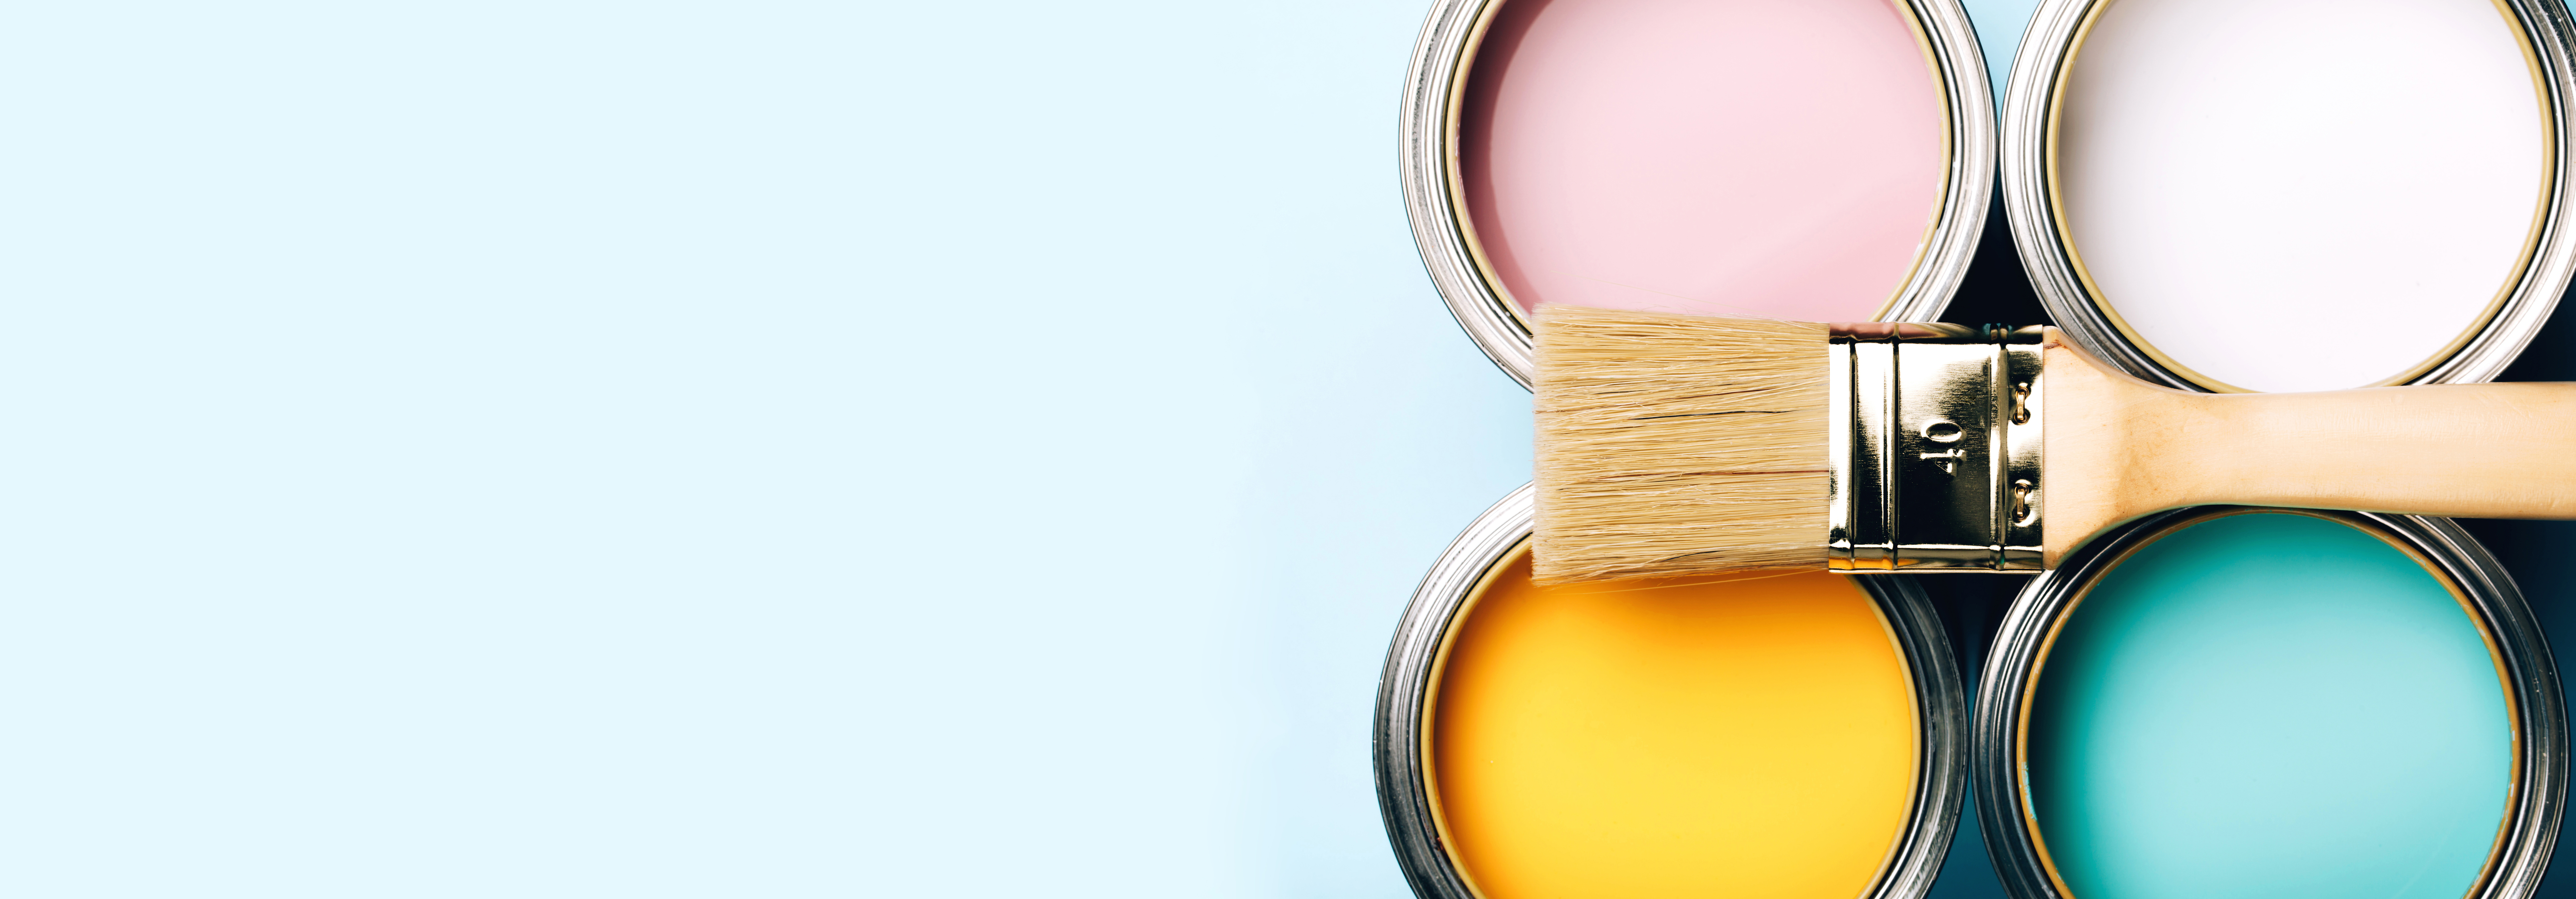 Benjamin Moore Paint Announces the Color of 2023!